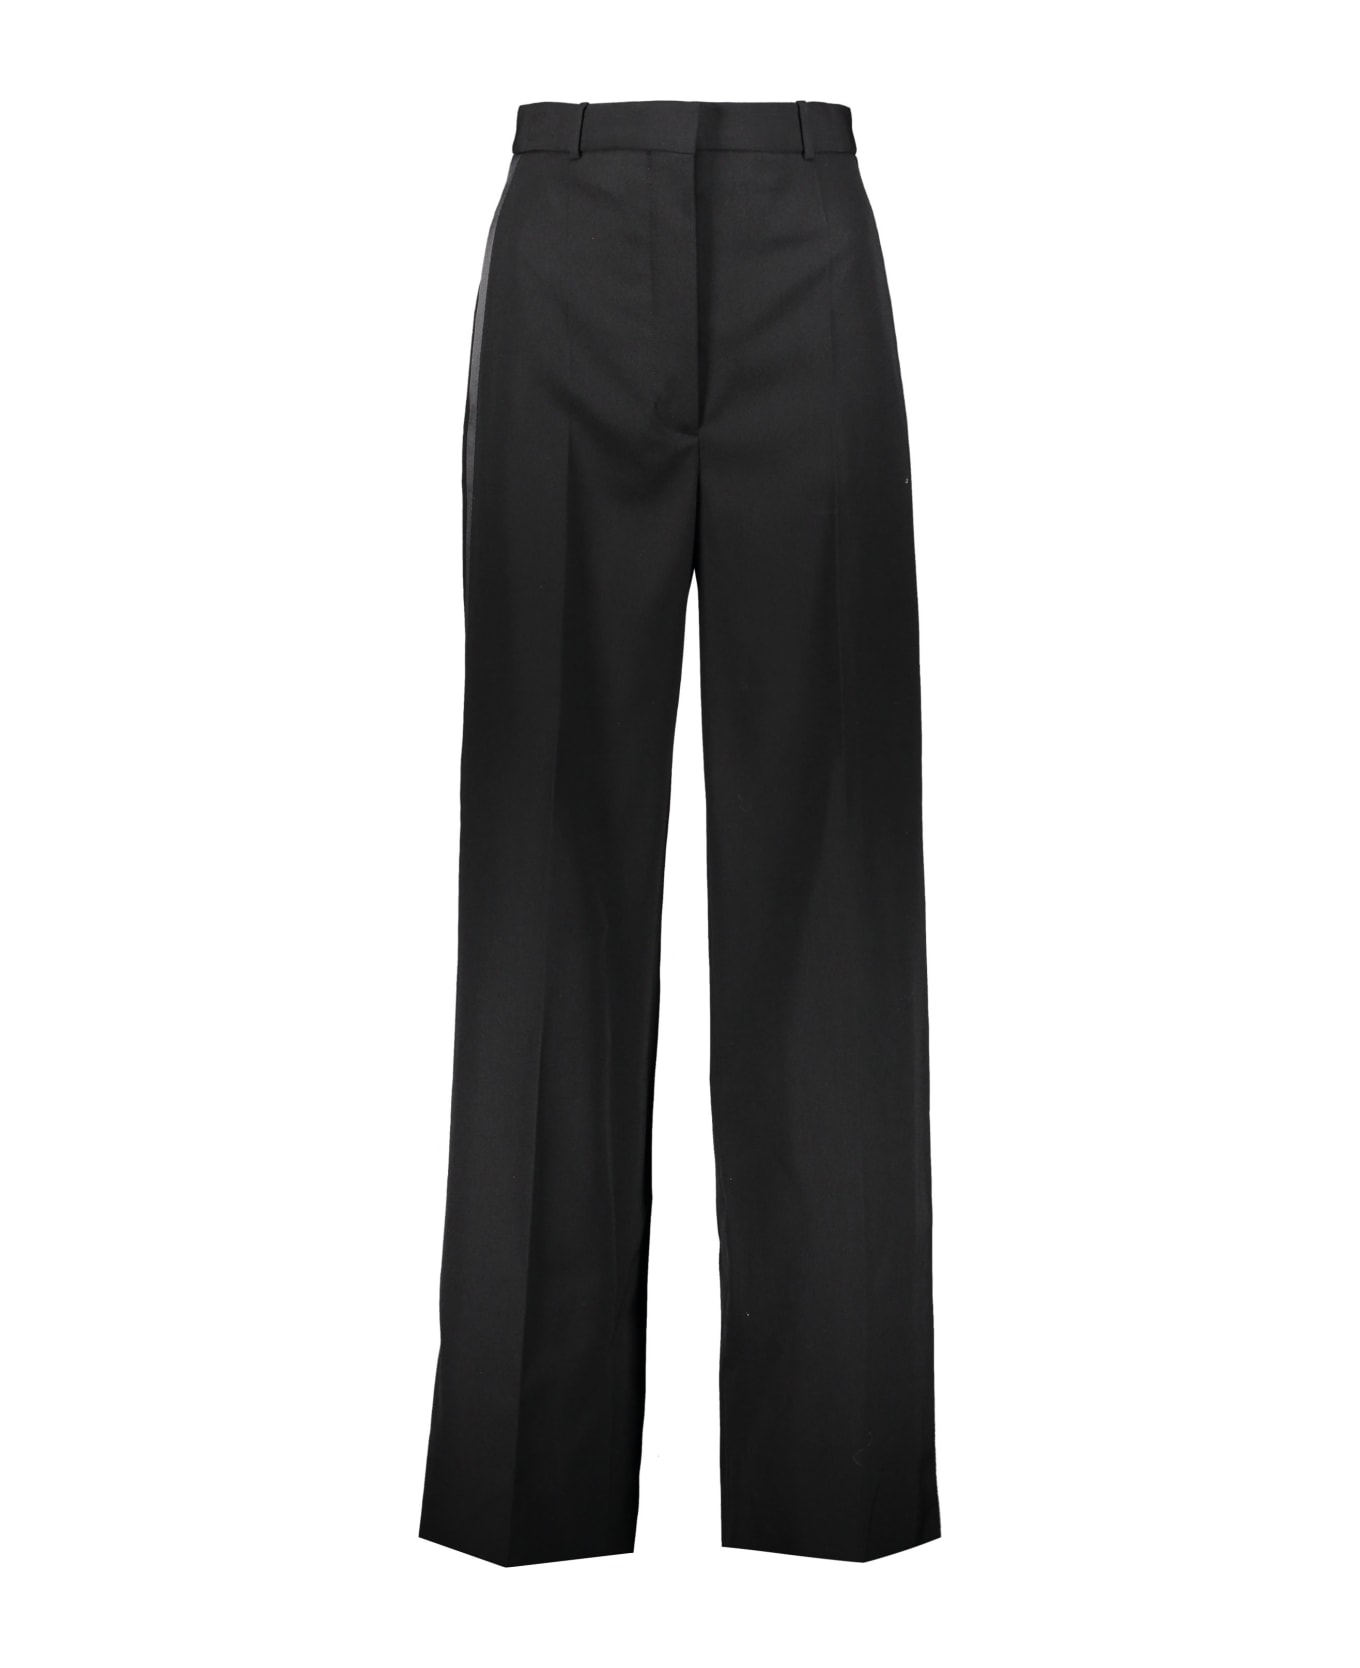 Burberry Wool Trousers - black ボトムス